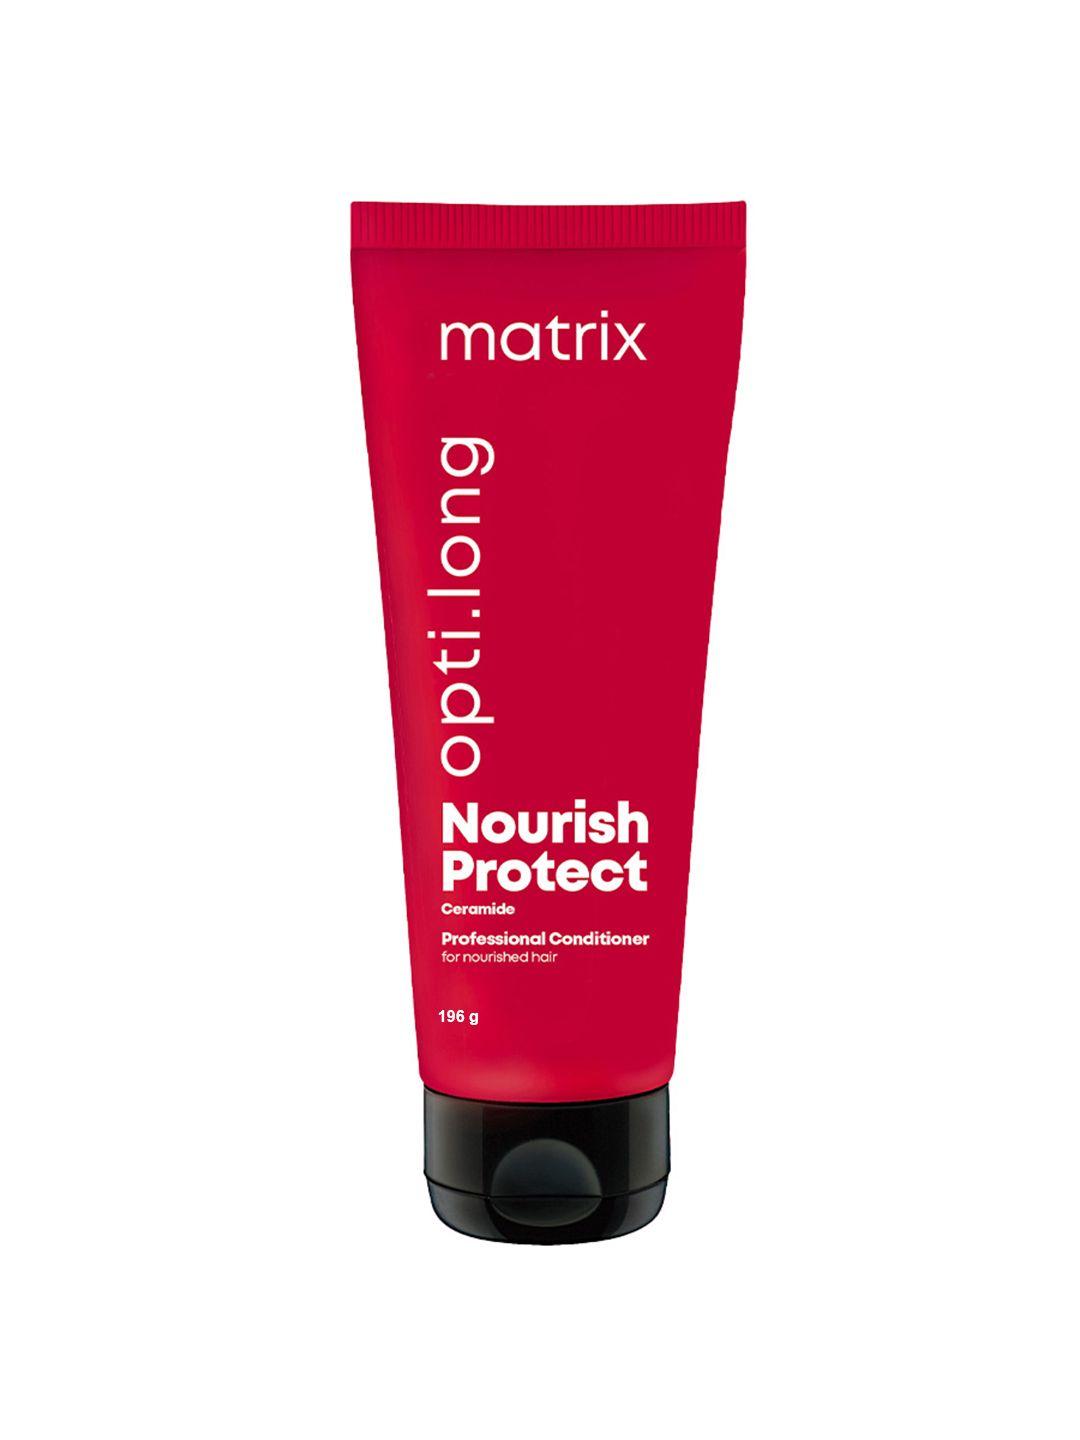 matrix opti long nourish protect conditioner with ceramide for long & nourished hair-196g